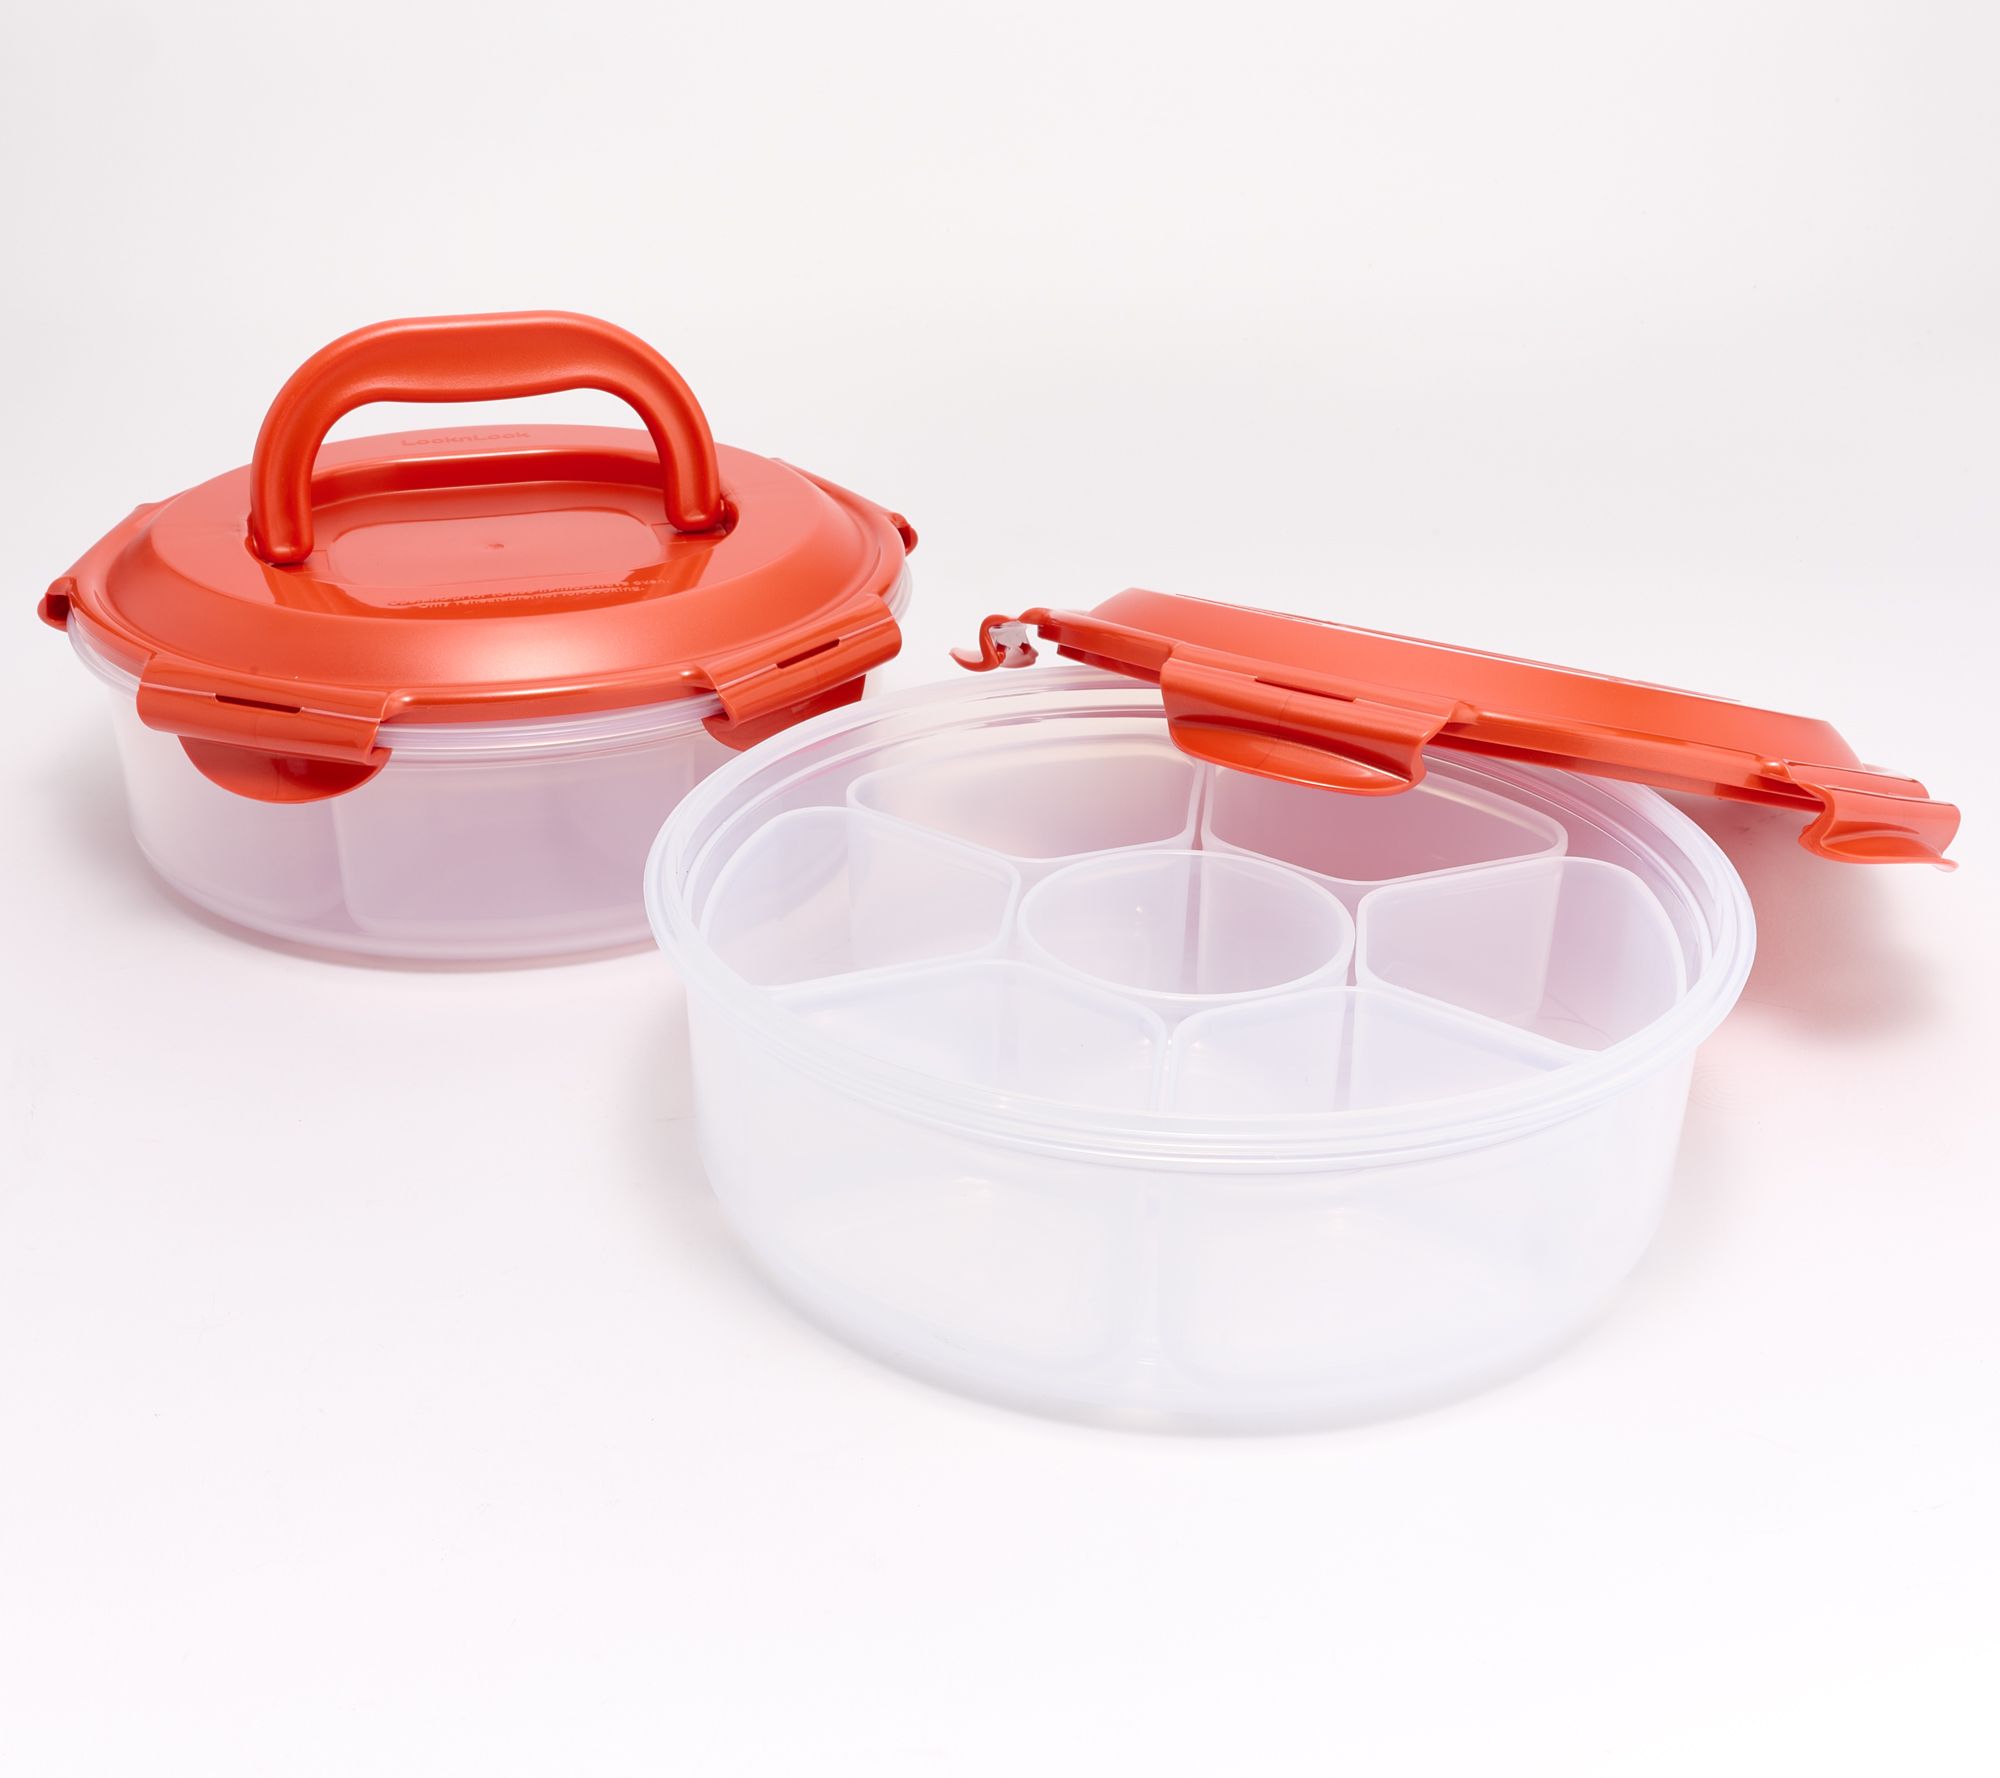 A Rubbermaid Brilliance Food Storage set is 56% off at